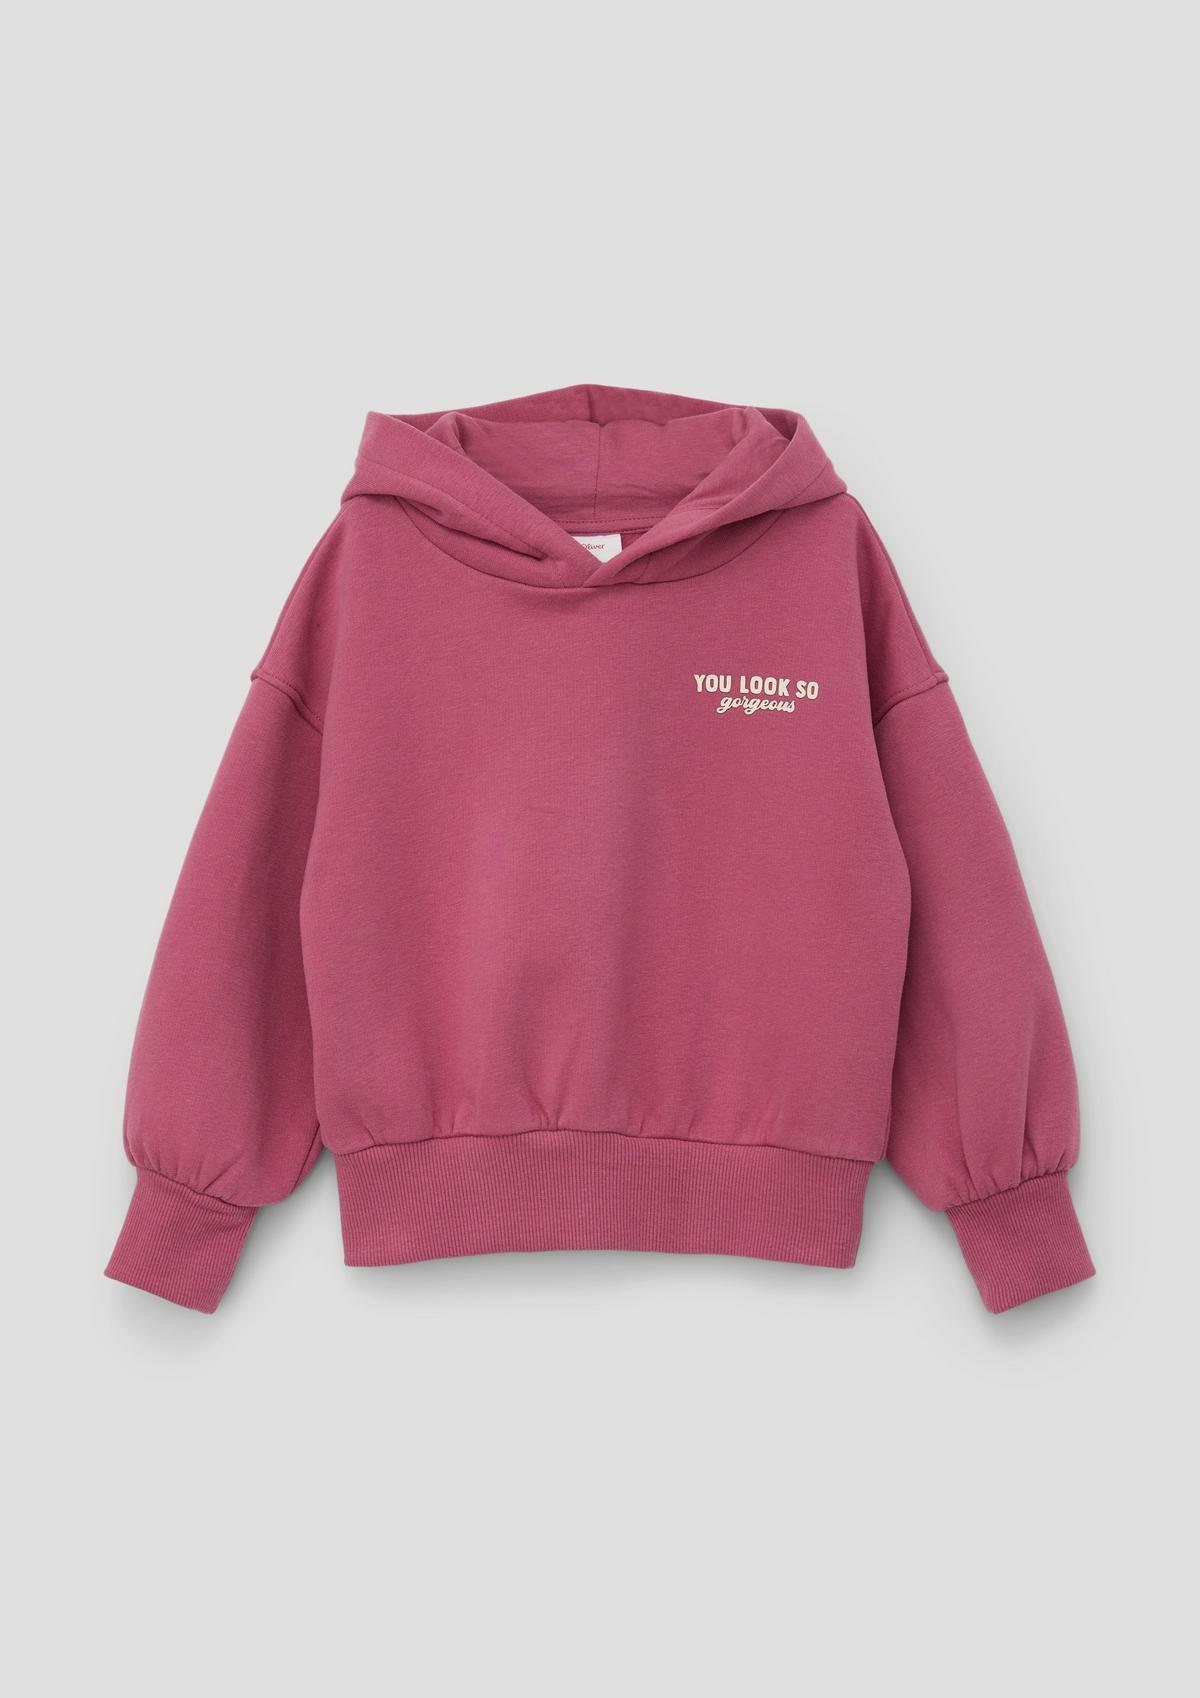 Hooded sweatshirt with a pink - reverse soft